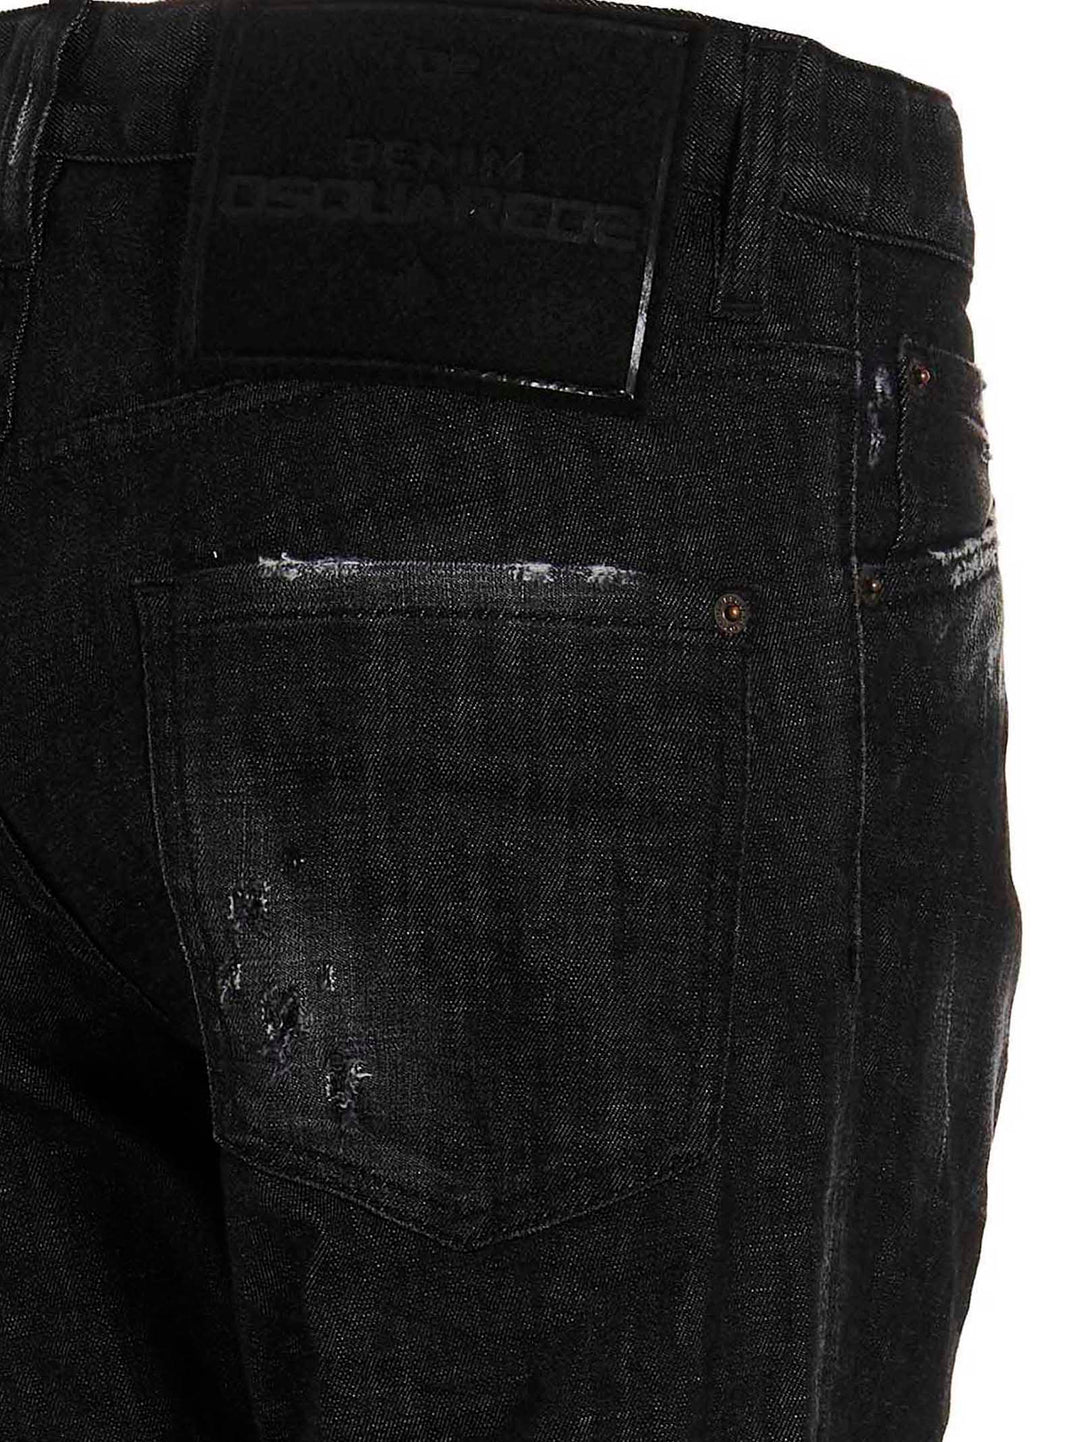 'Cool Guy' Jeans Nero